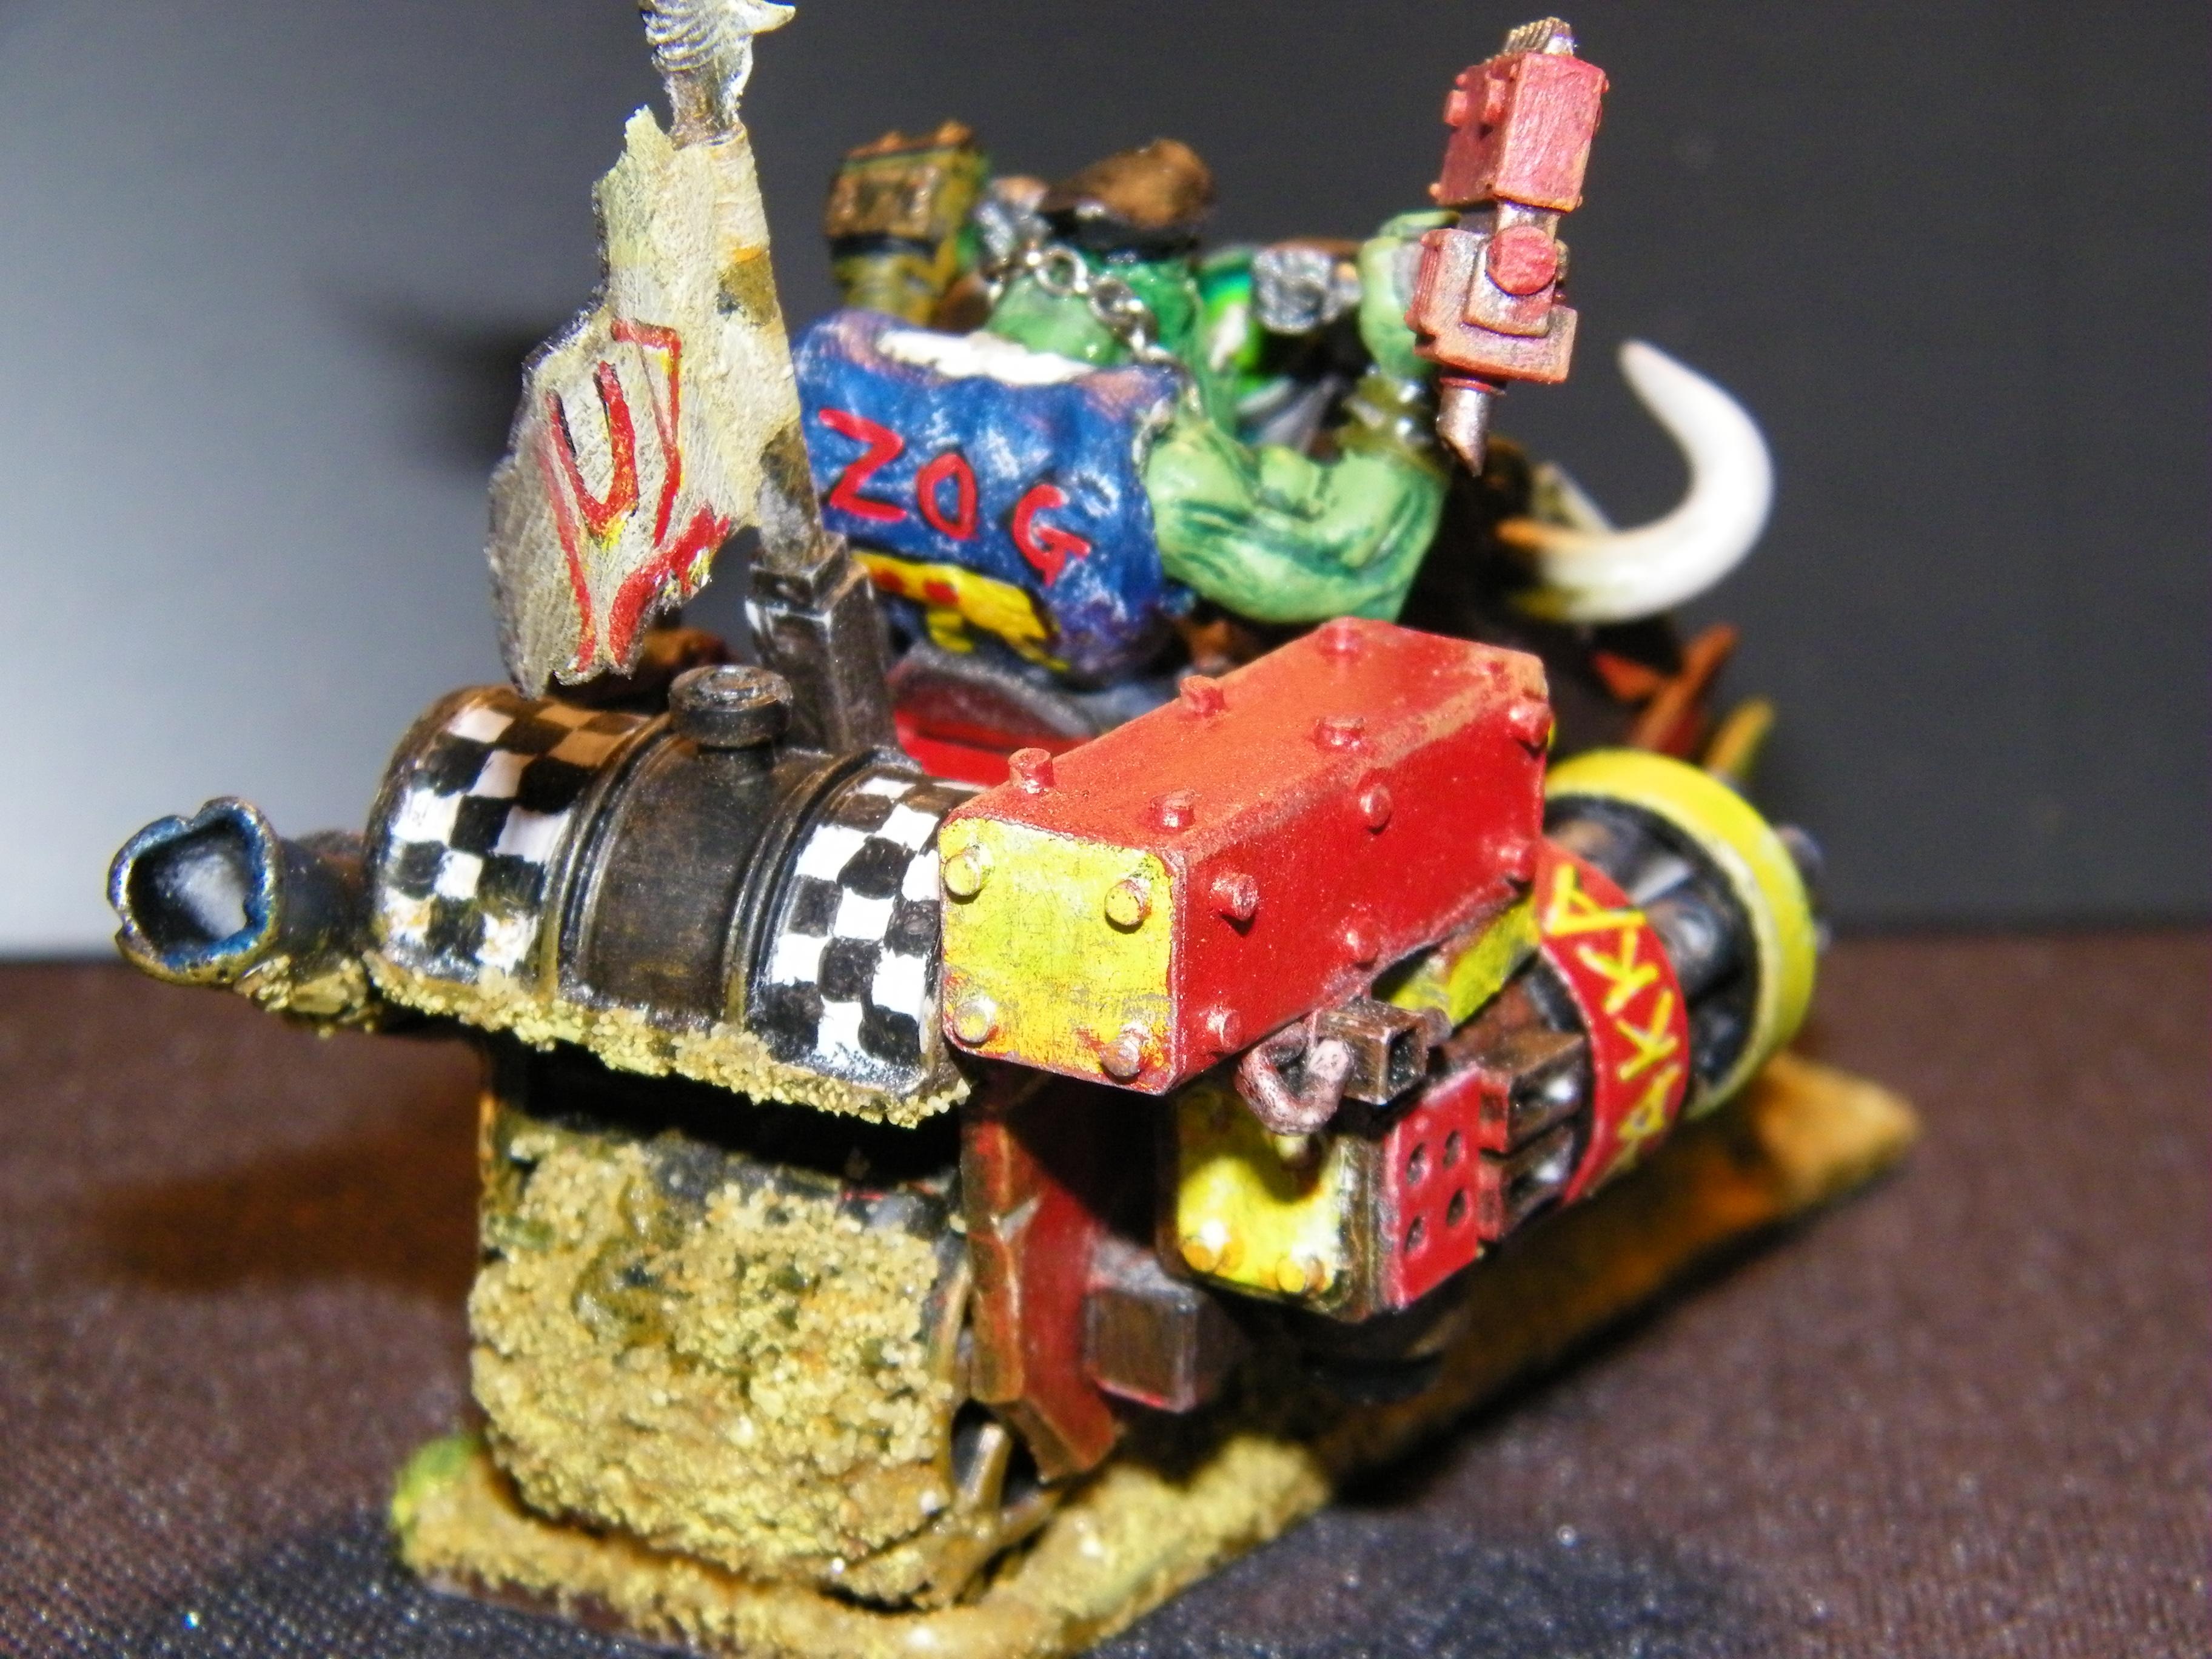 Orks, Not sure about dirty wheels